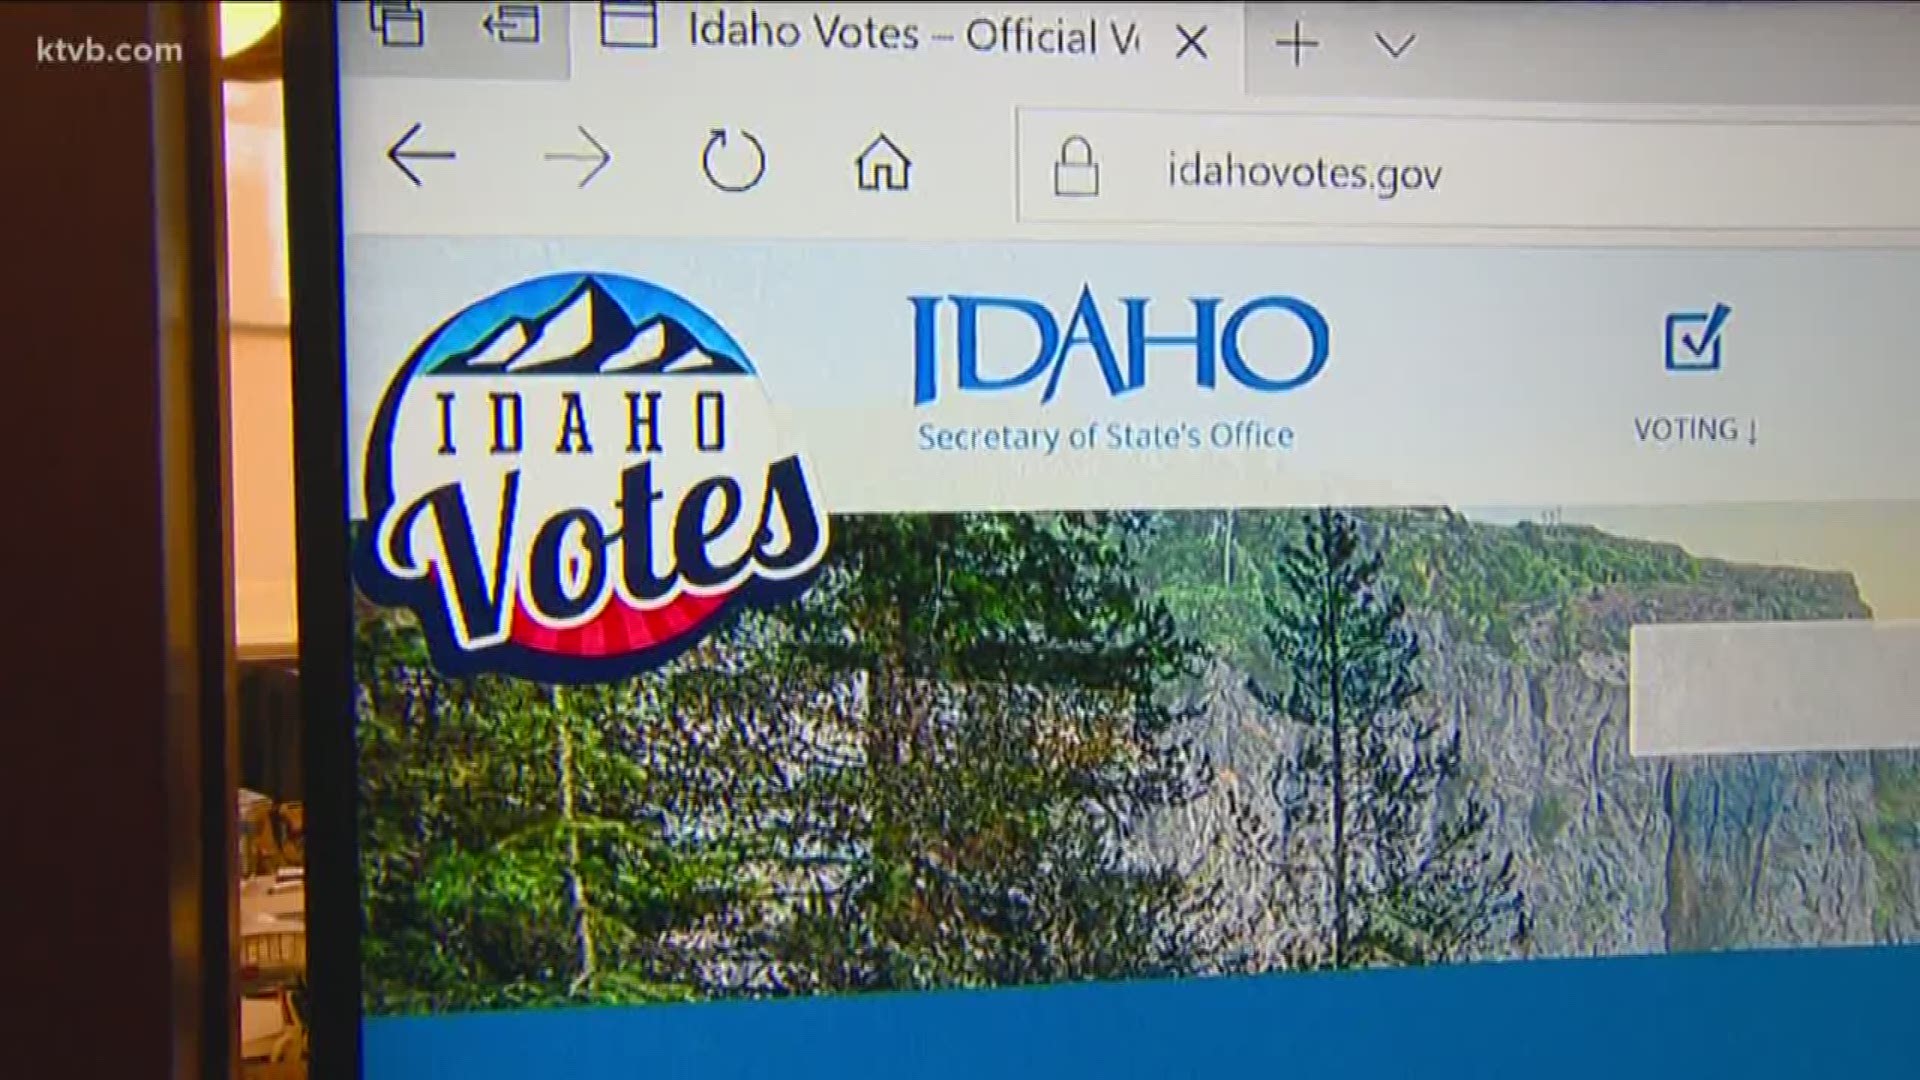 Idaho Secretary of State Lawerence Denney unveiled the new website.